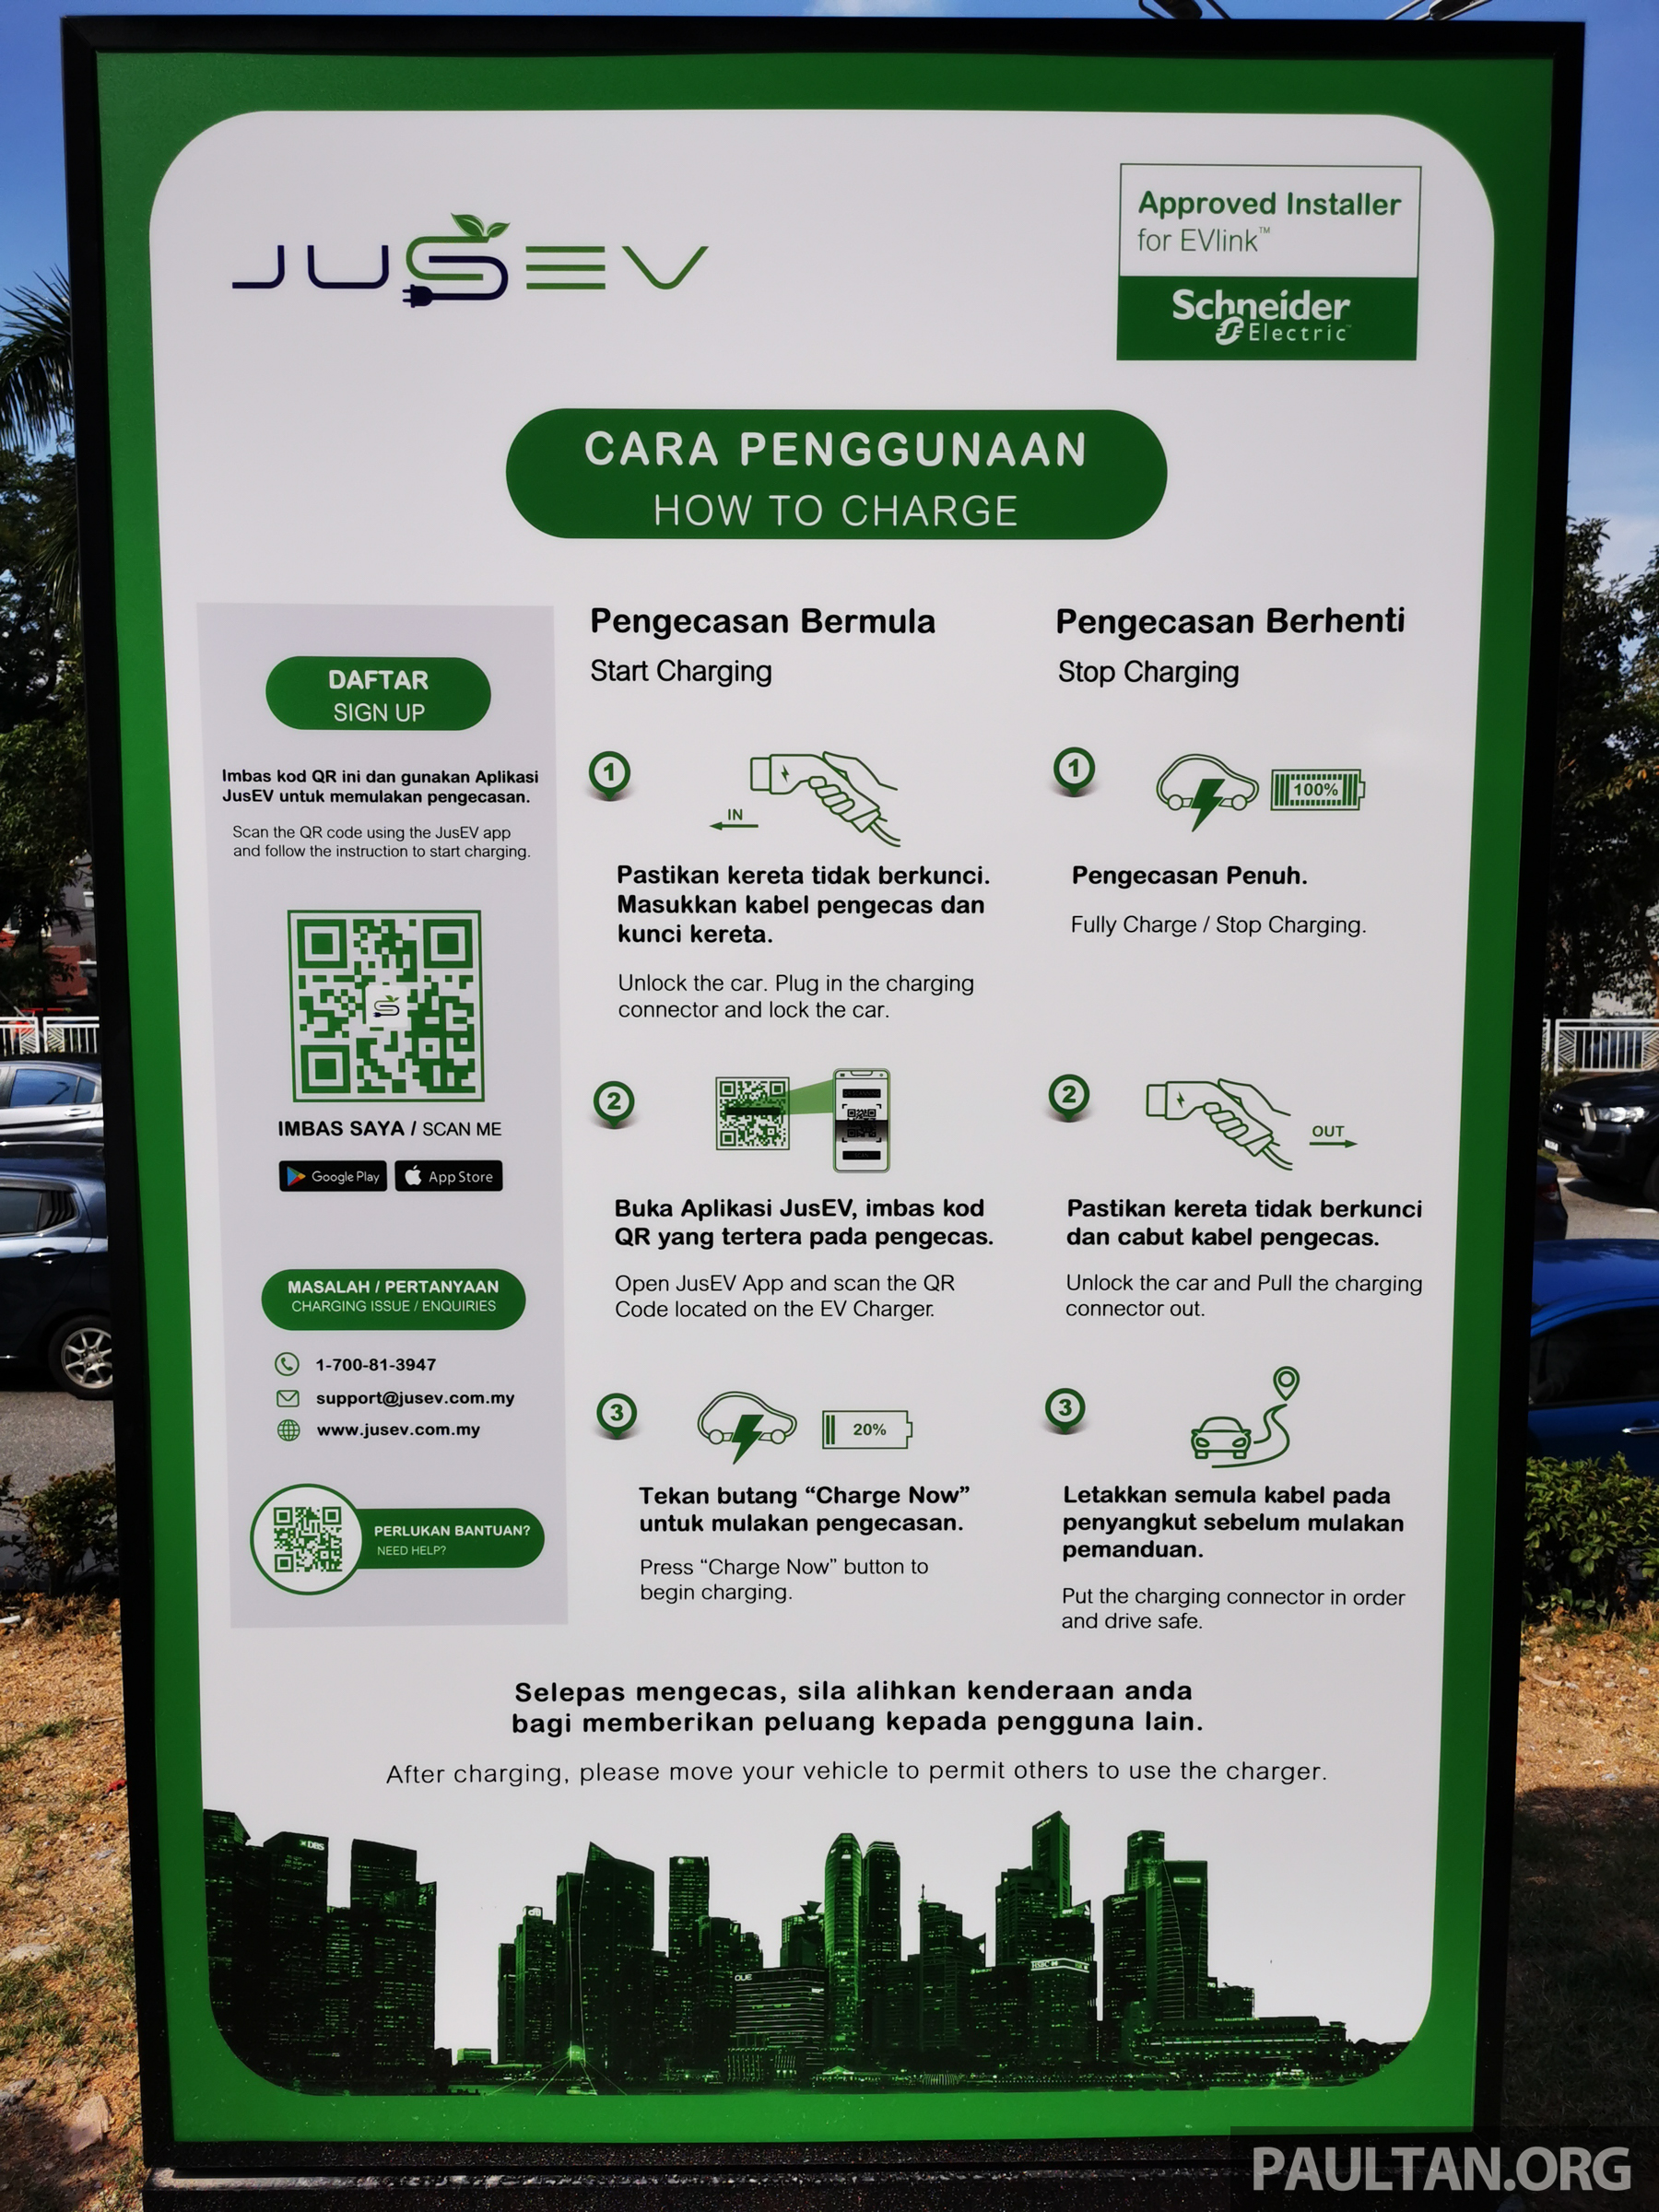 Schneider Electric Malaysia Public EV launches PJ charger, Plaza 33-15